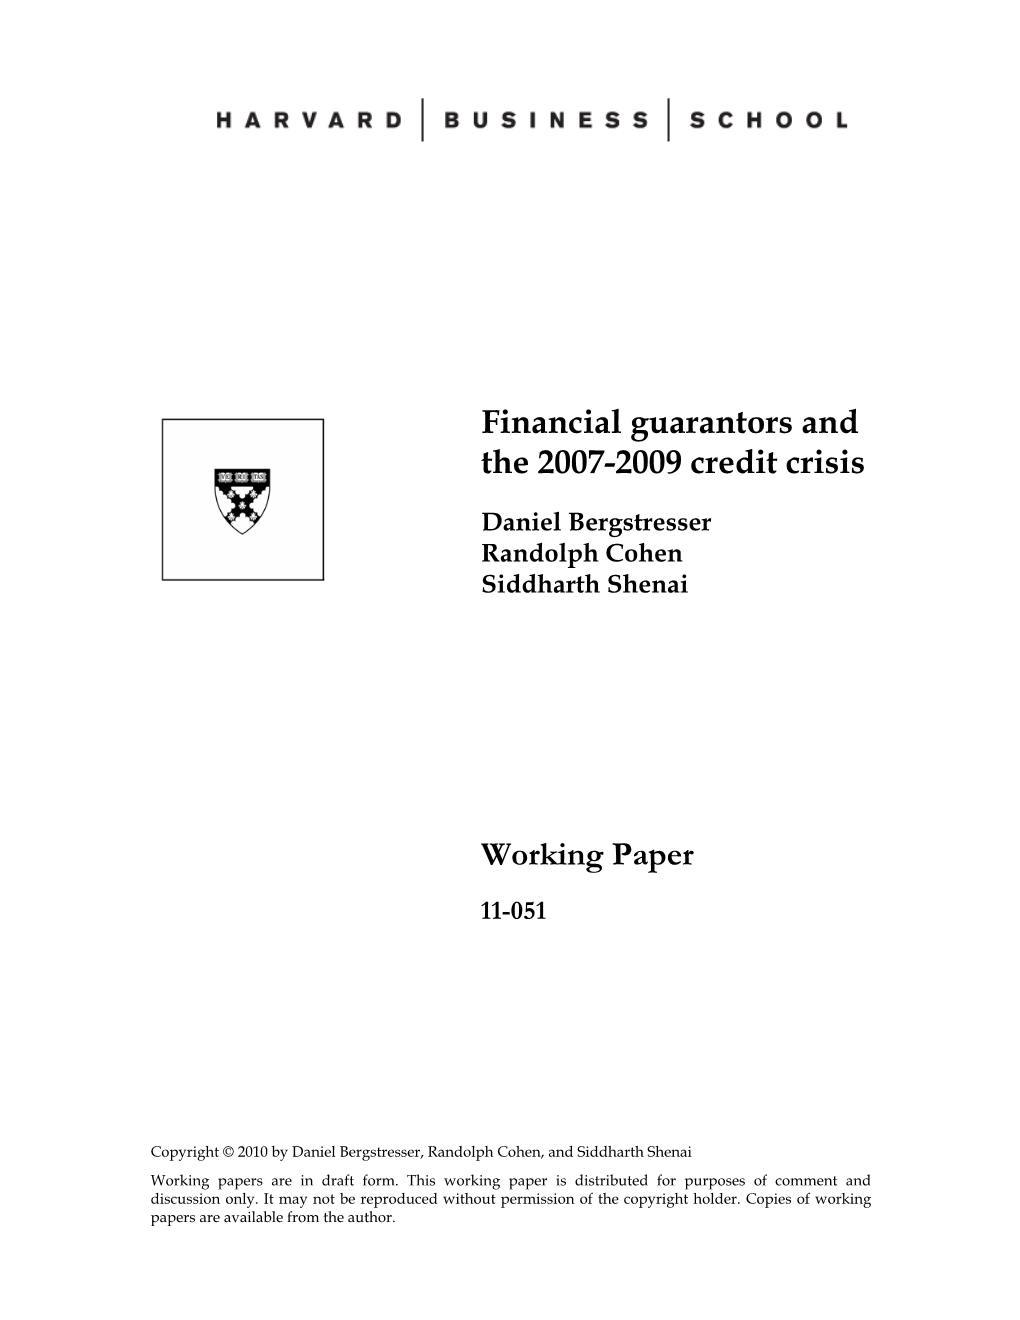 Financial Guarantors and the 2007-2009 Credit Crisis Working